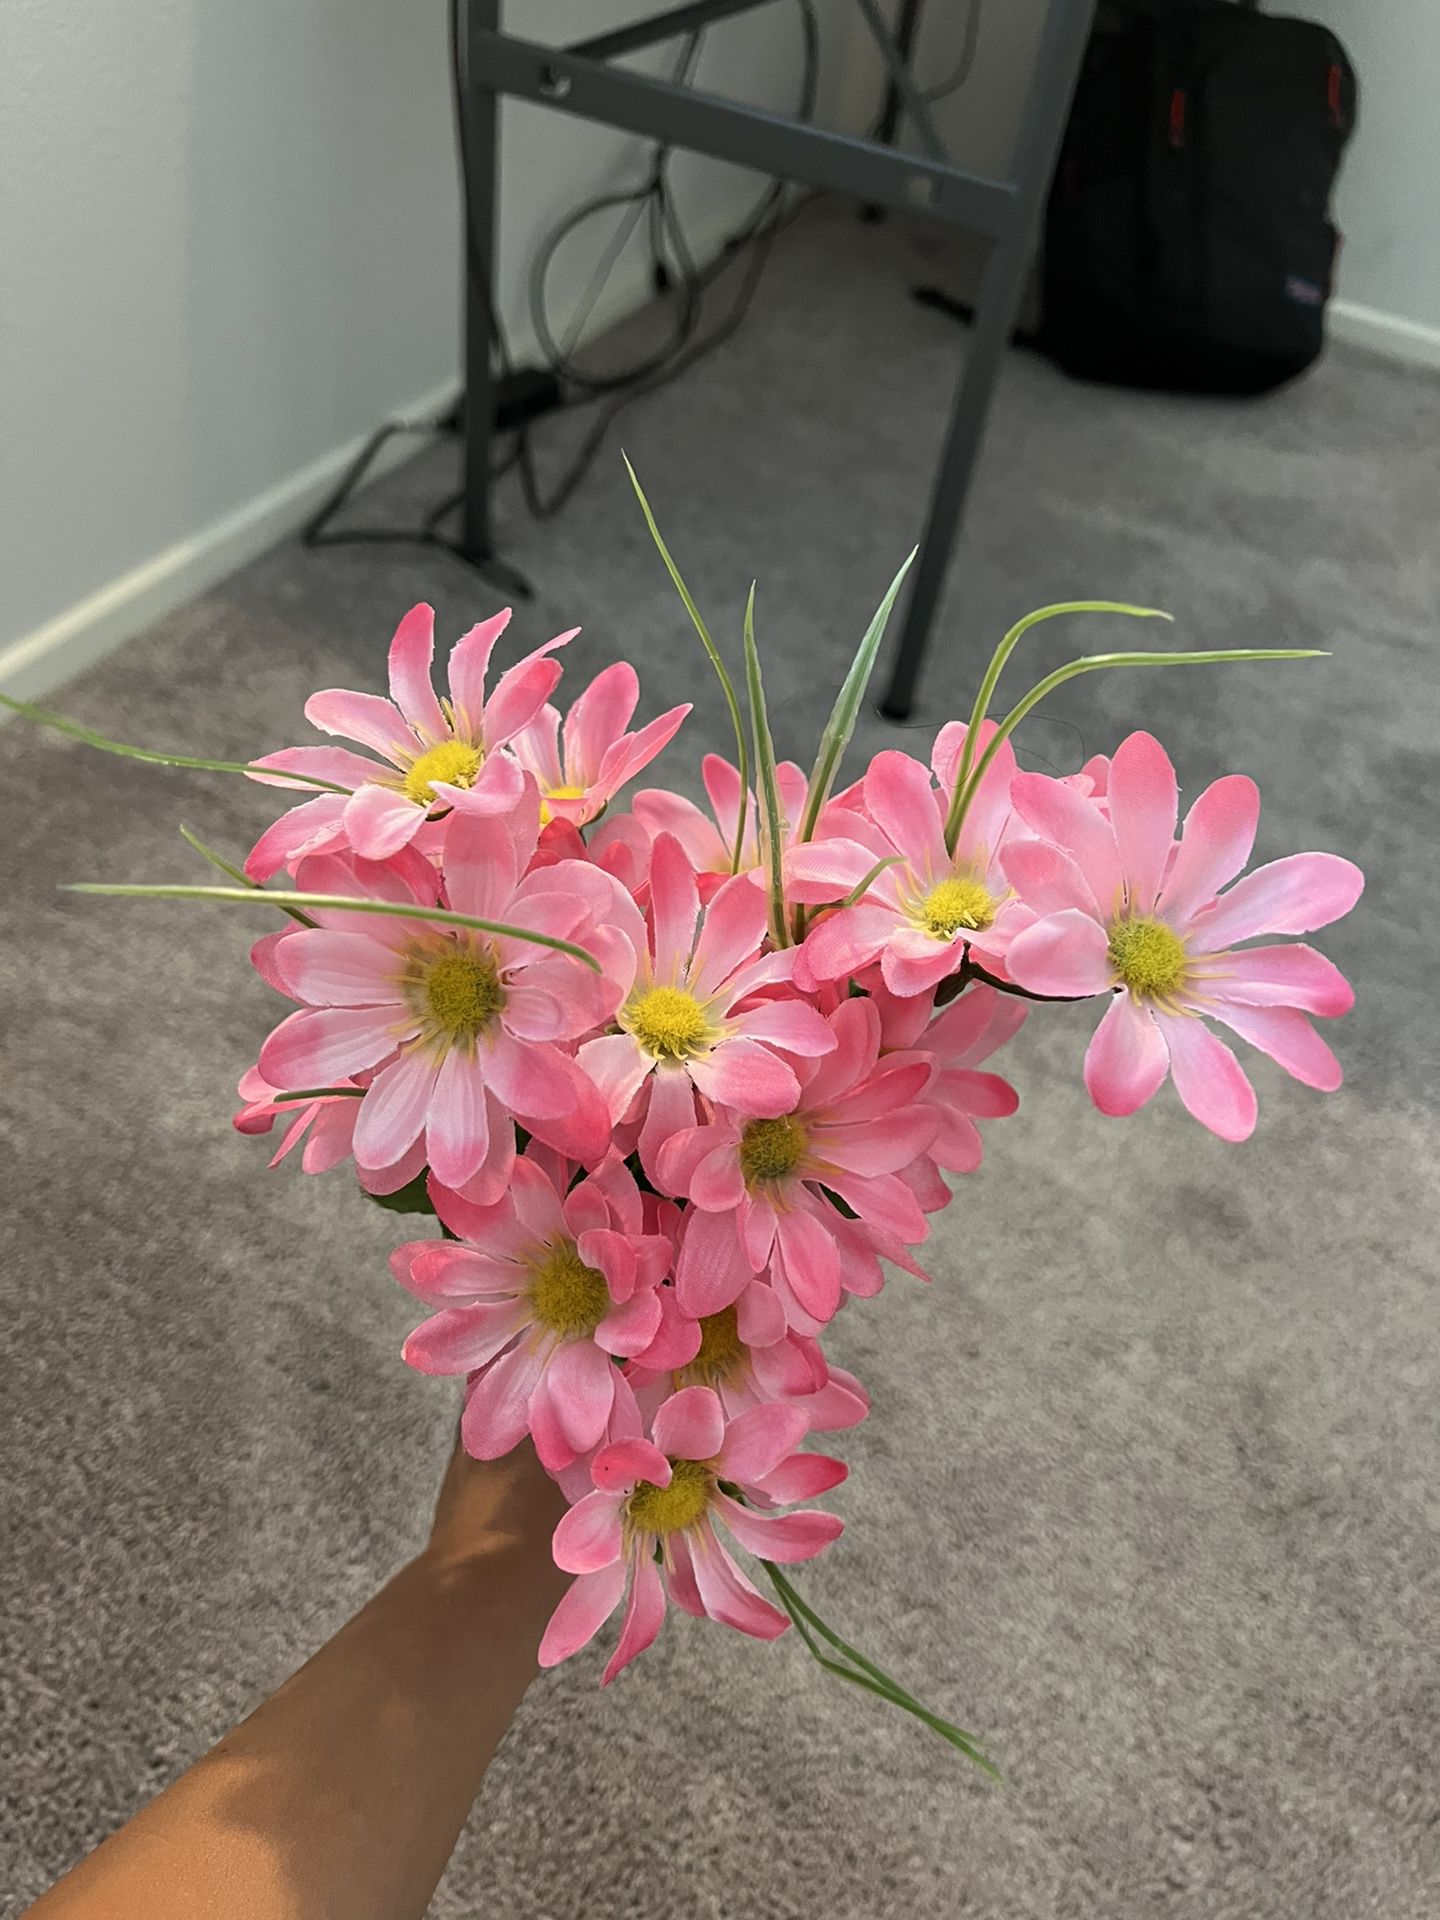 Artificial Flowers For Decor/Crafts 